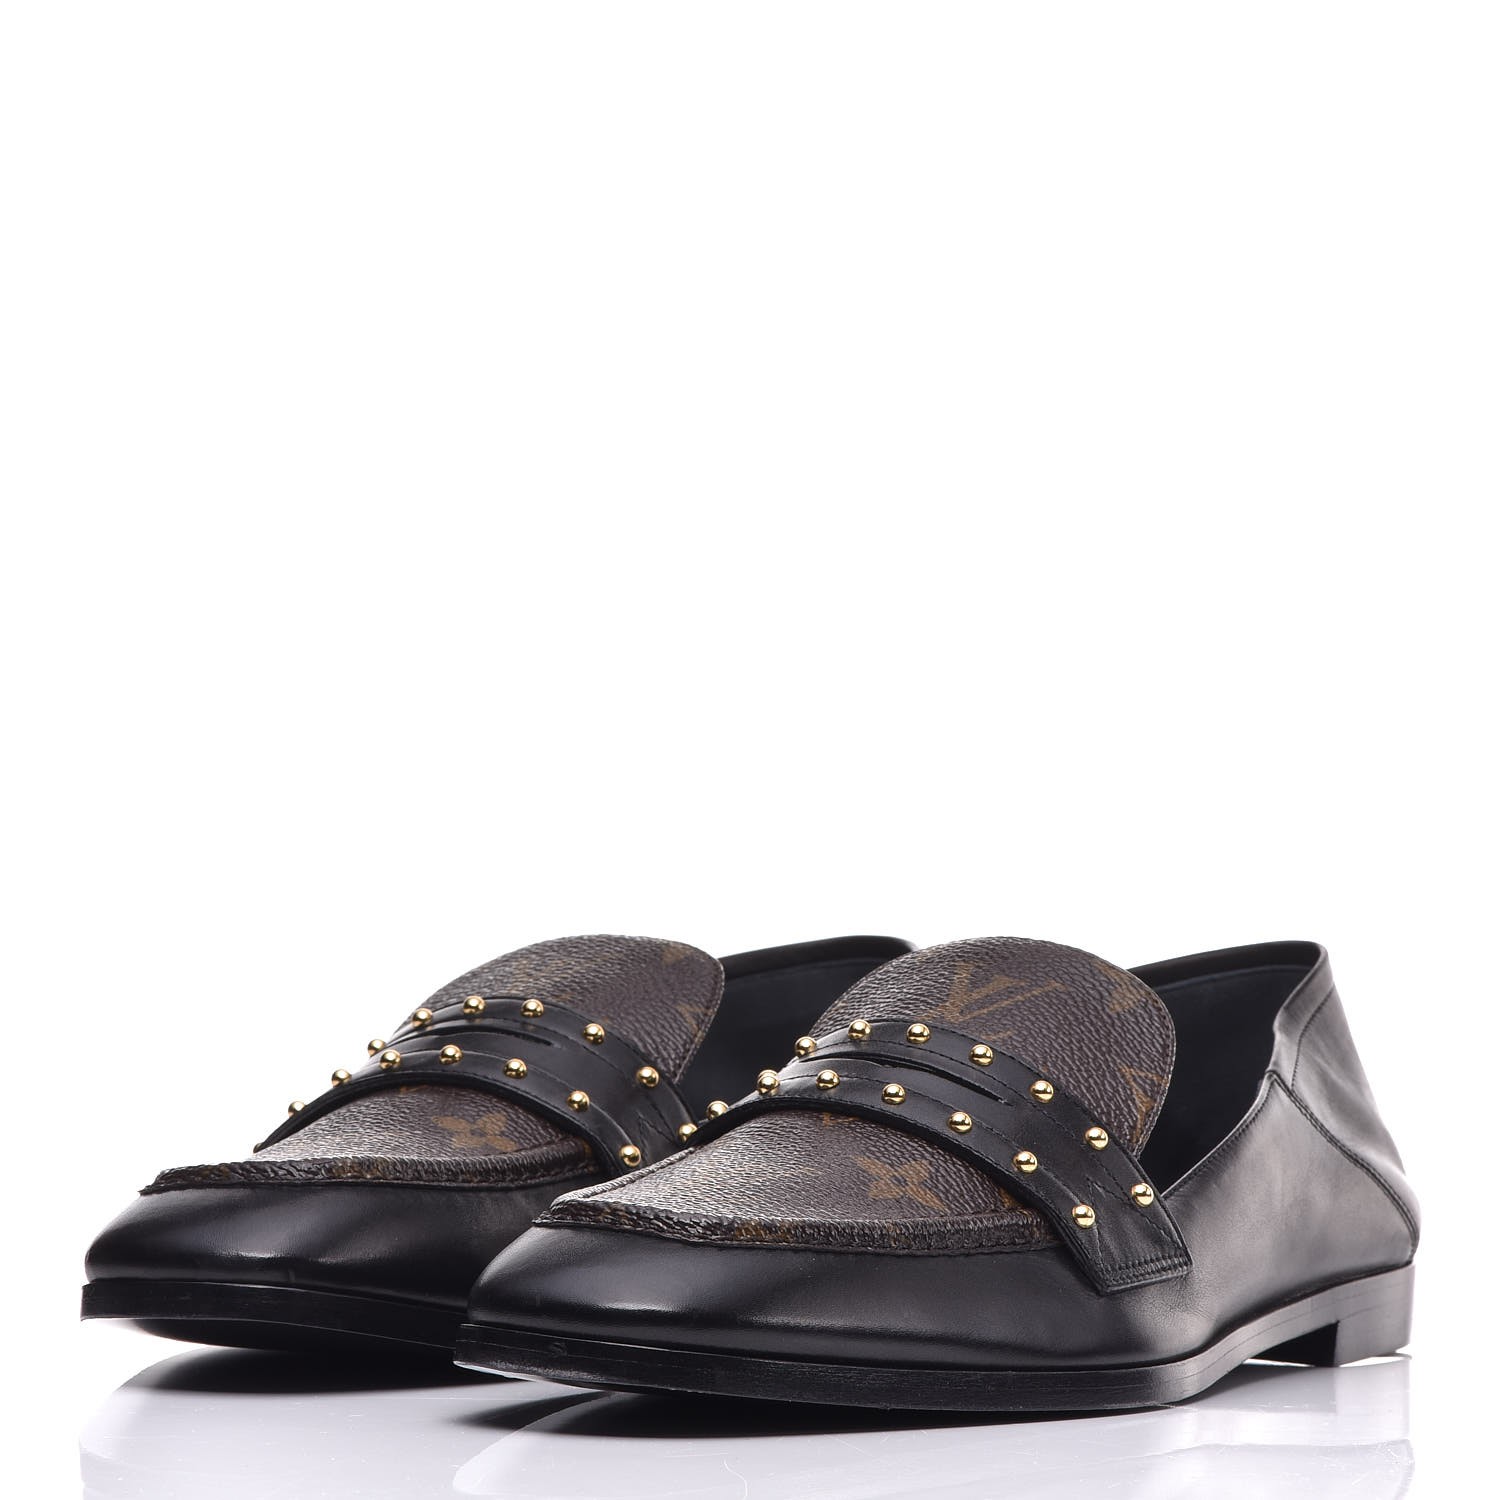 LOUIS VUITTON Monogram Womens Studded Loafers 39 Black 347525